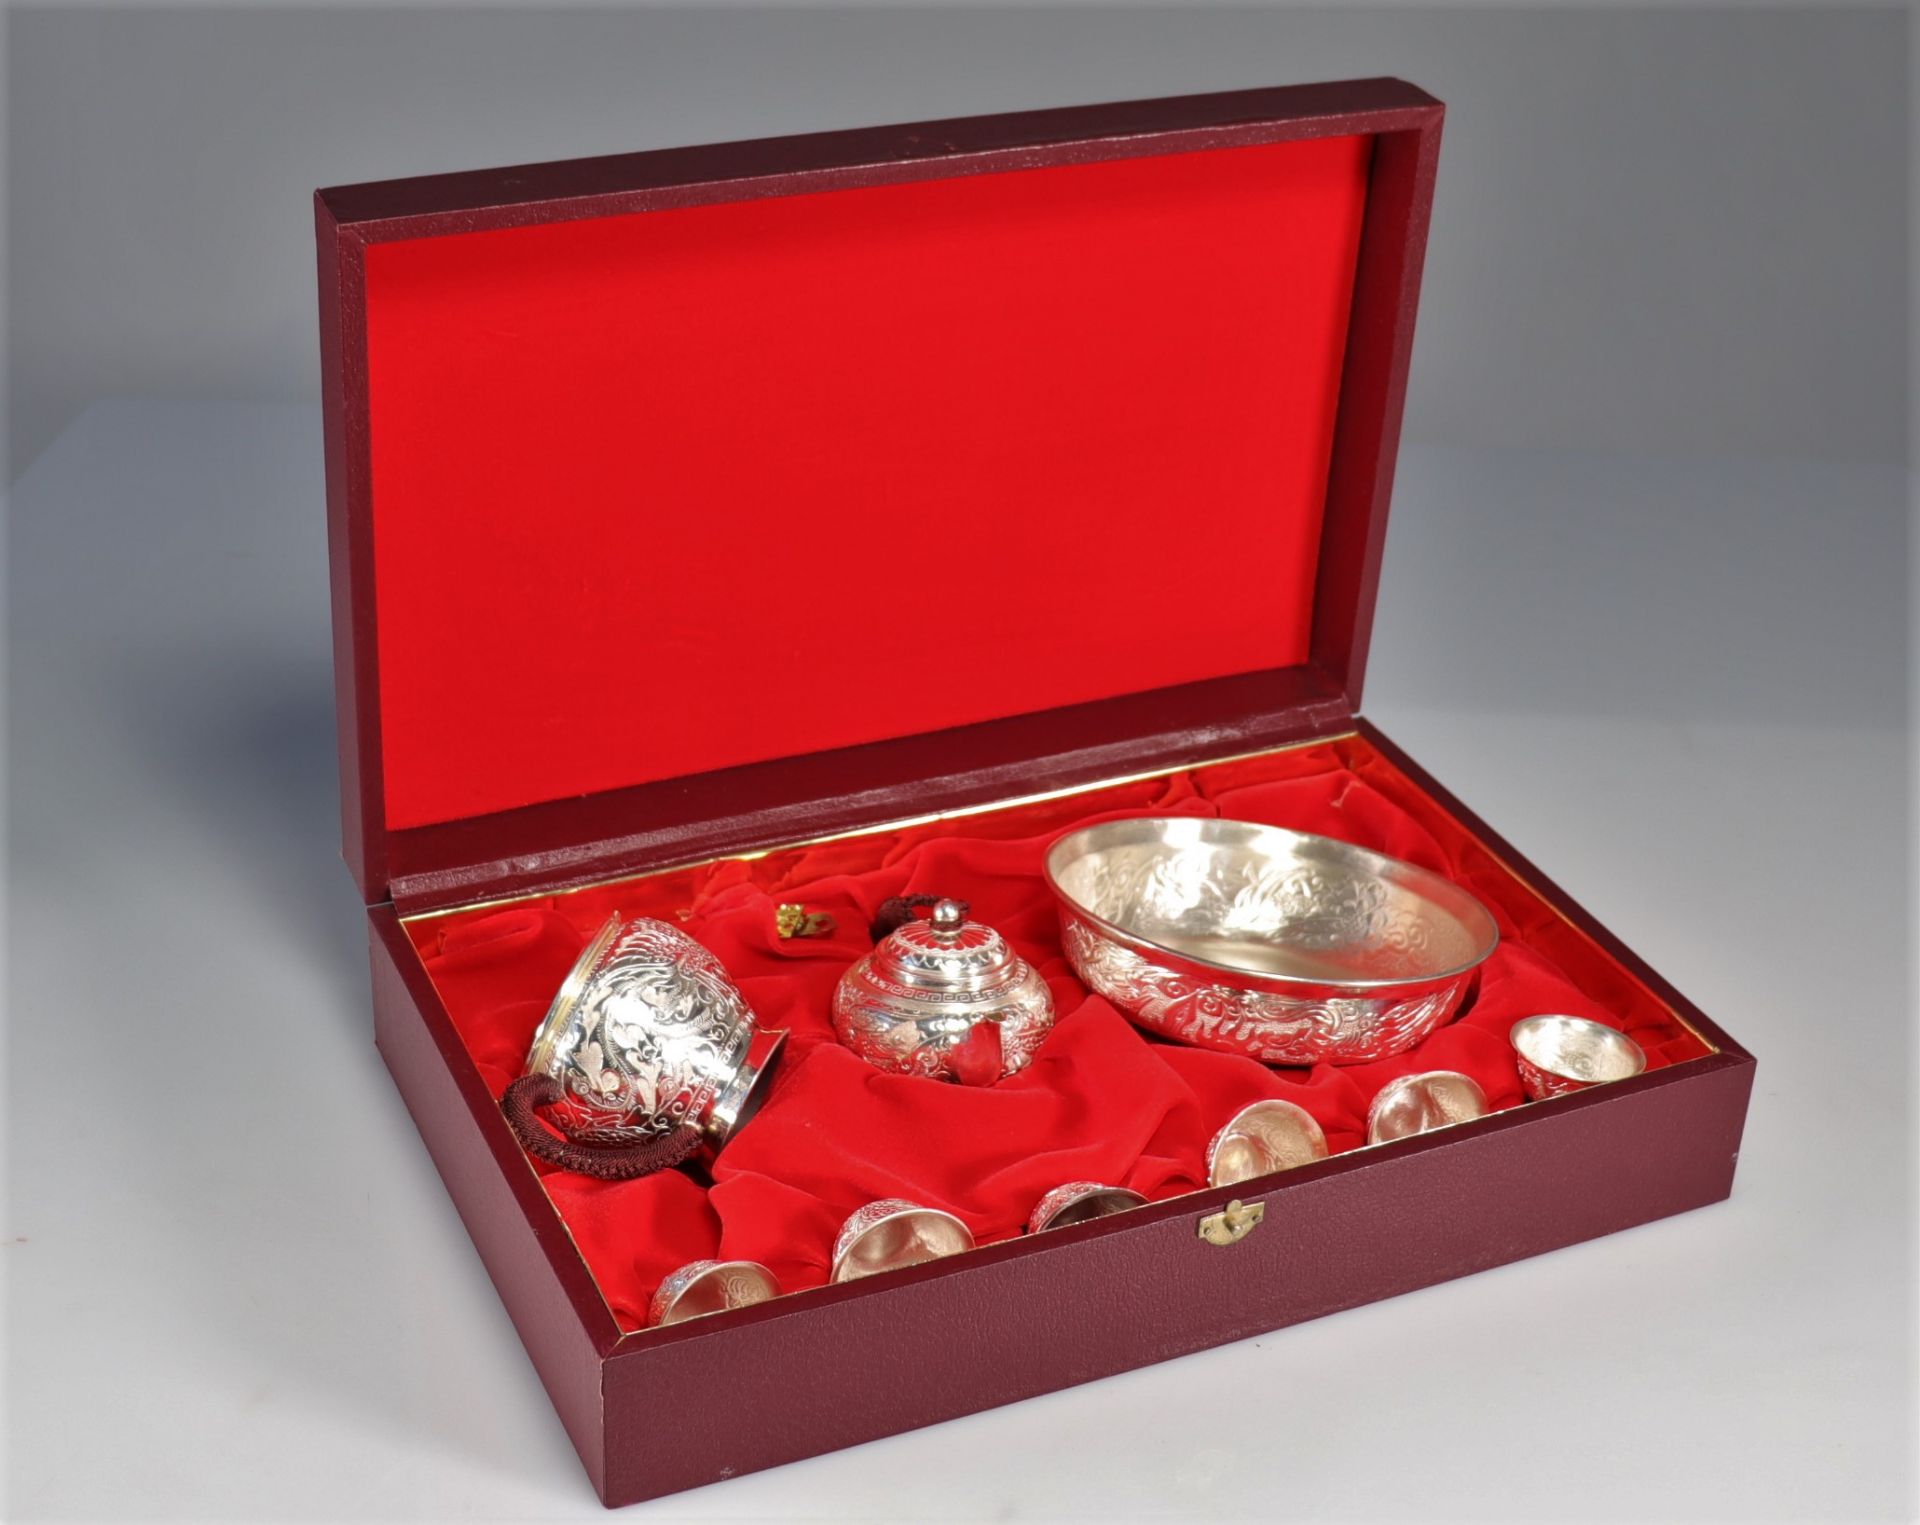 Sterling silver tea service decorated with 20th century dragons